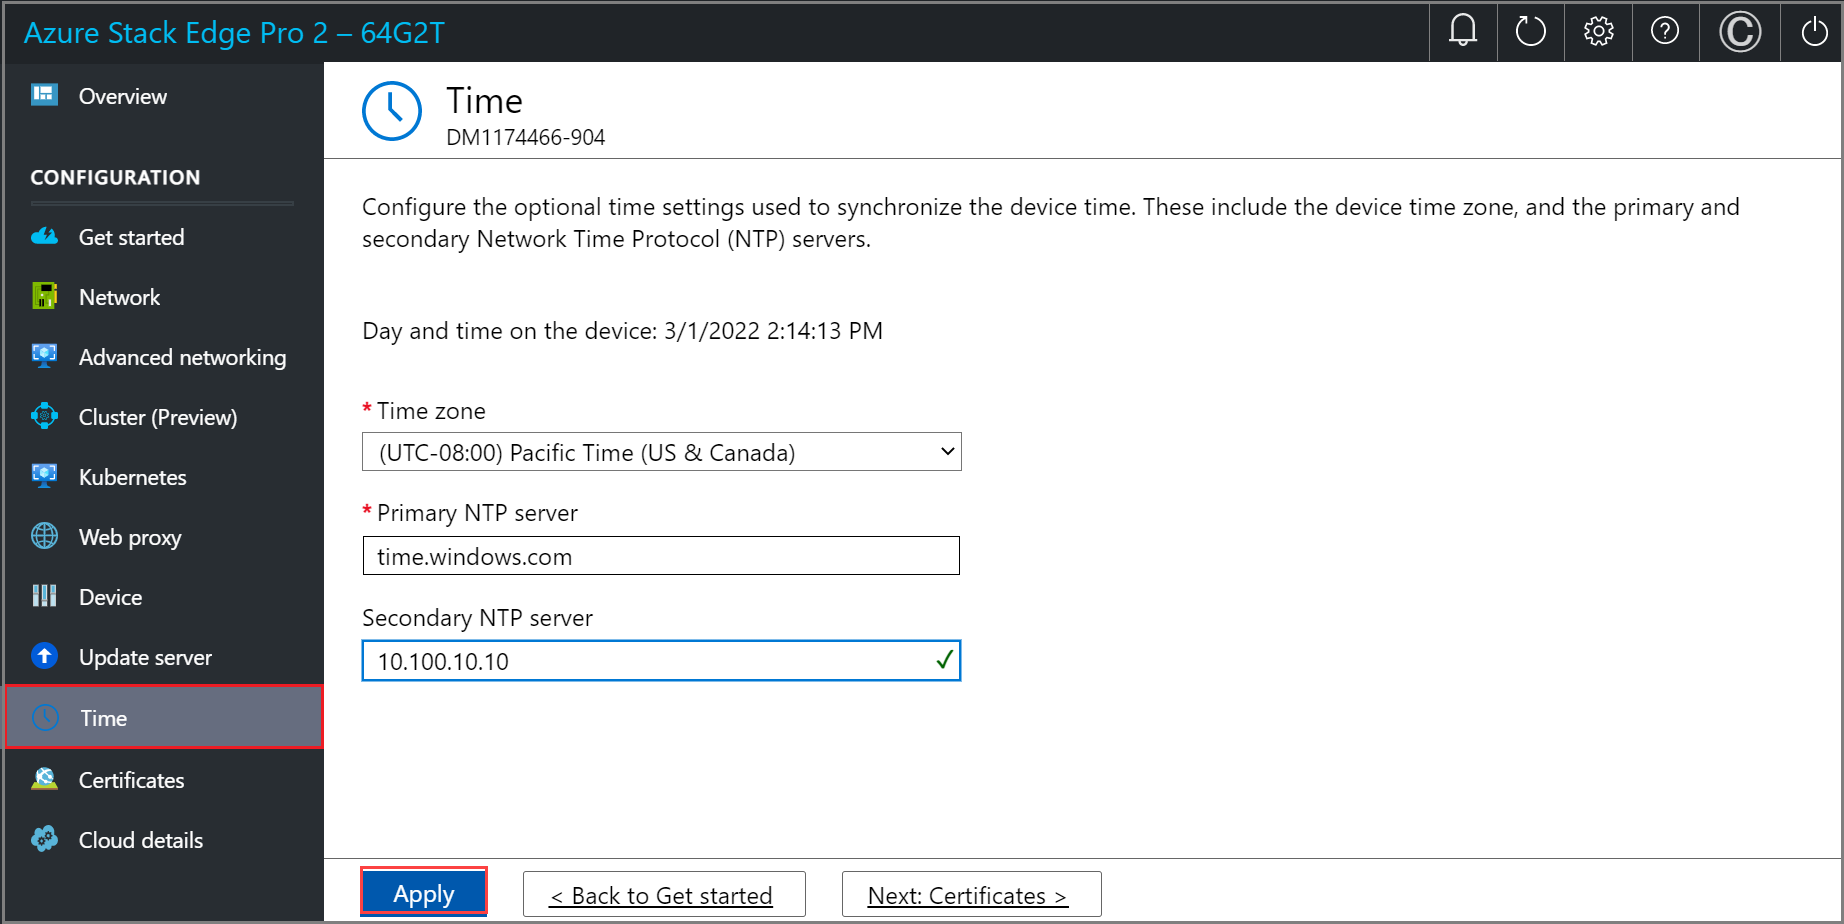 Screenshot of the Time page in the local web UI of an Azure Stack Edge device. The Apply button is highlighted.